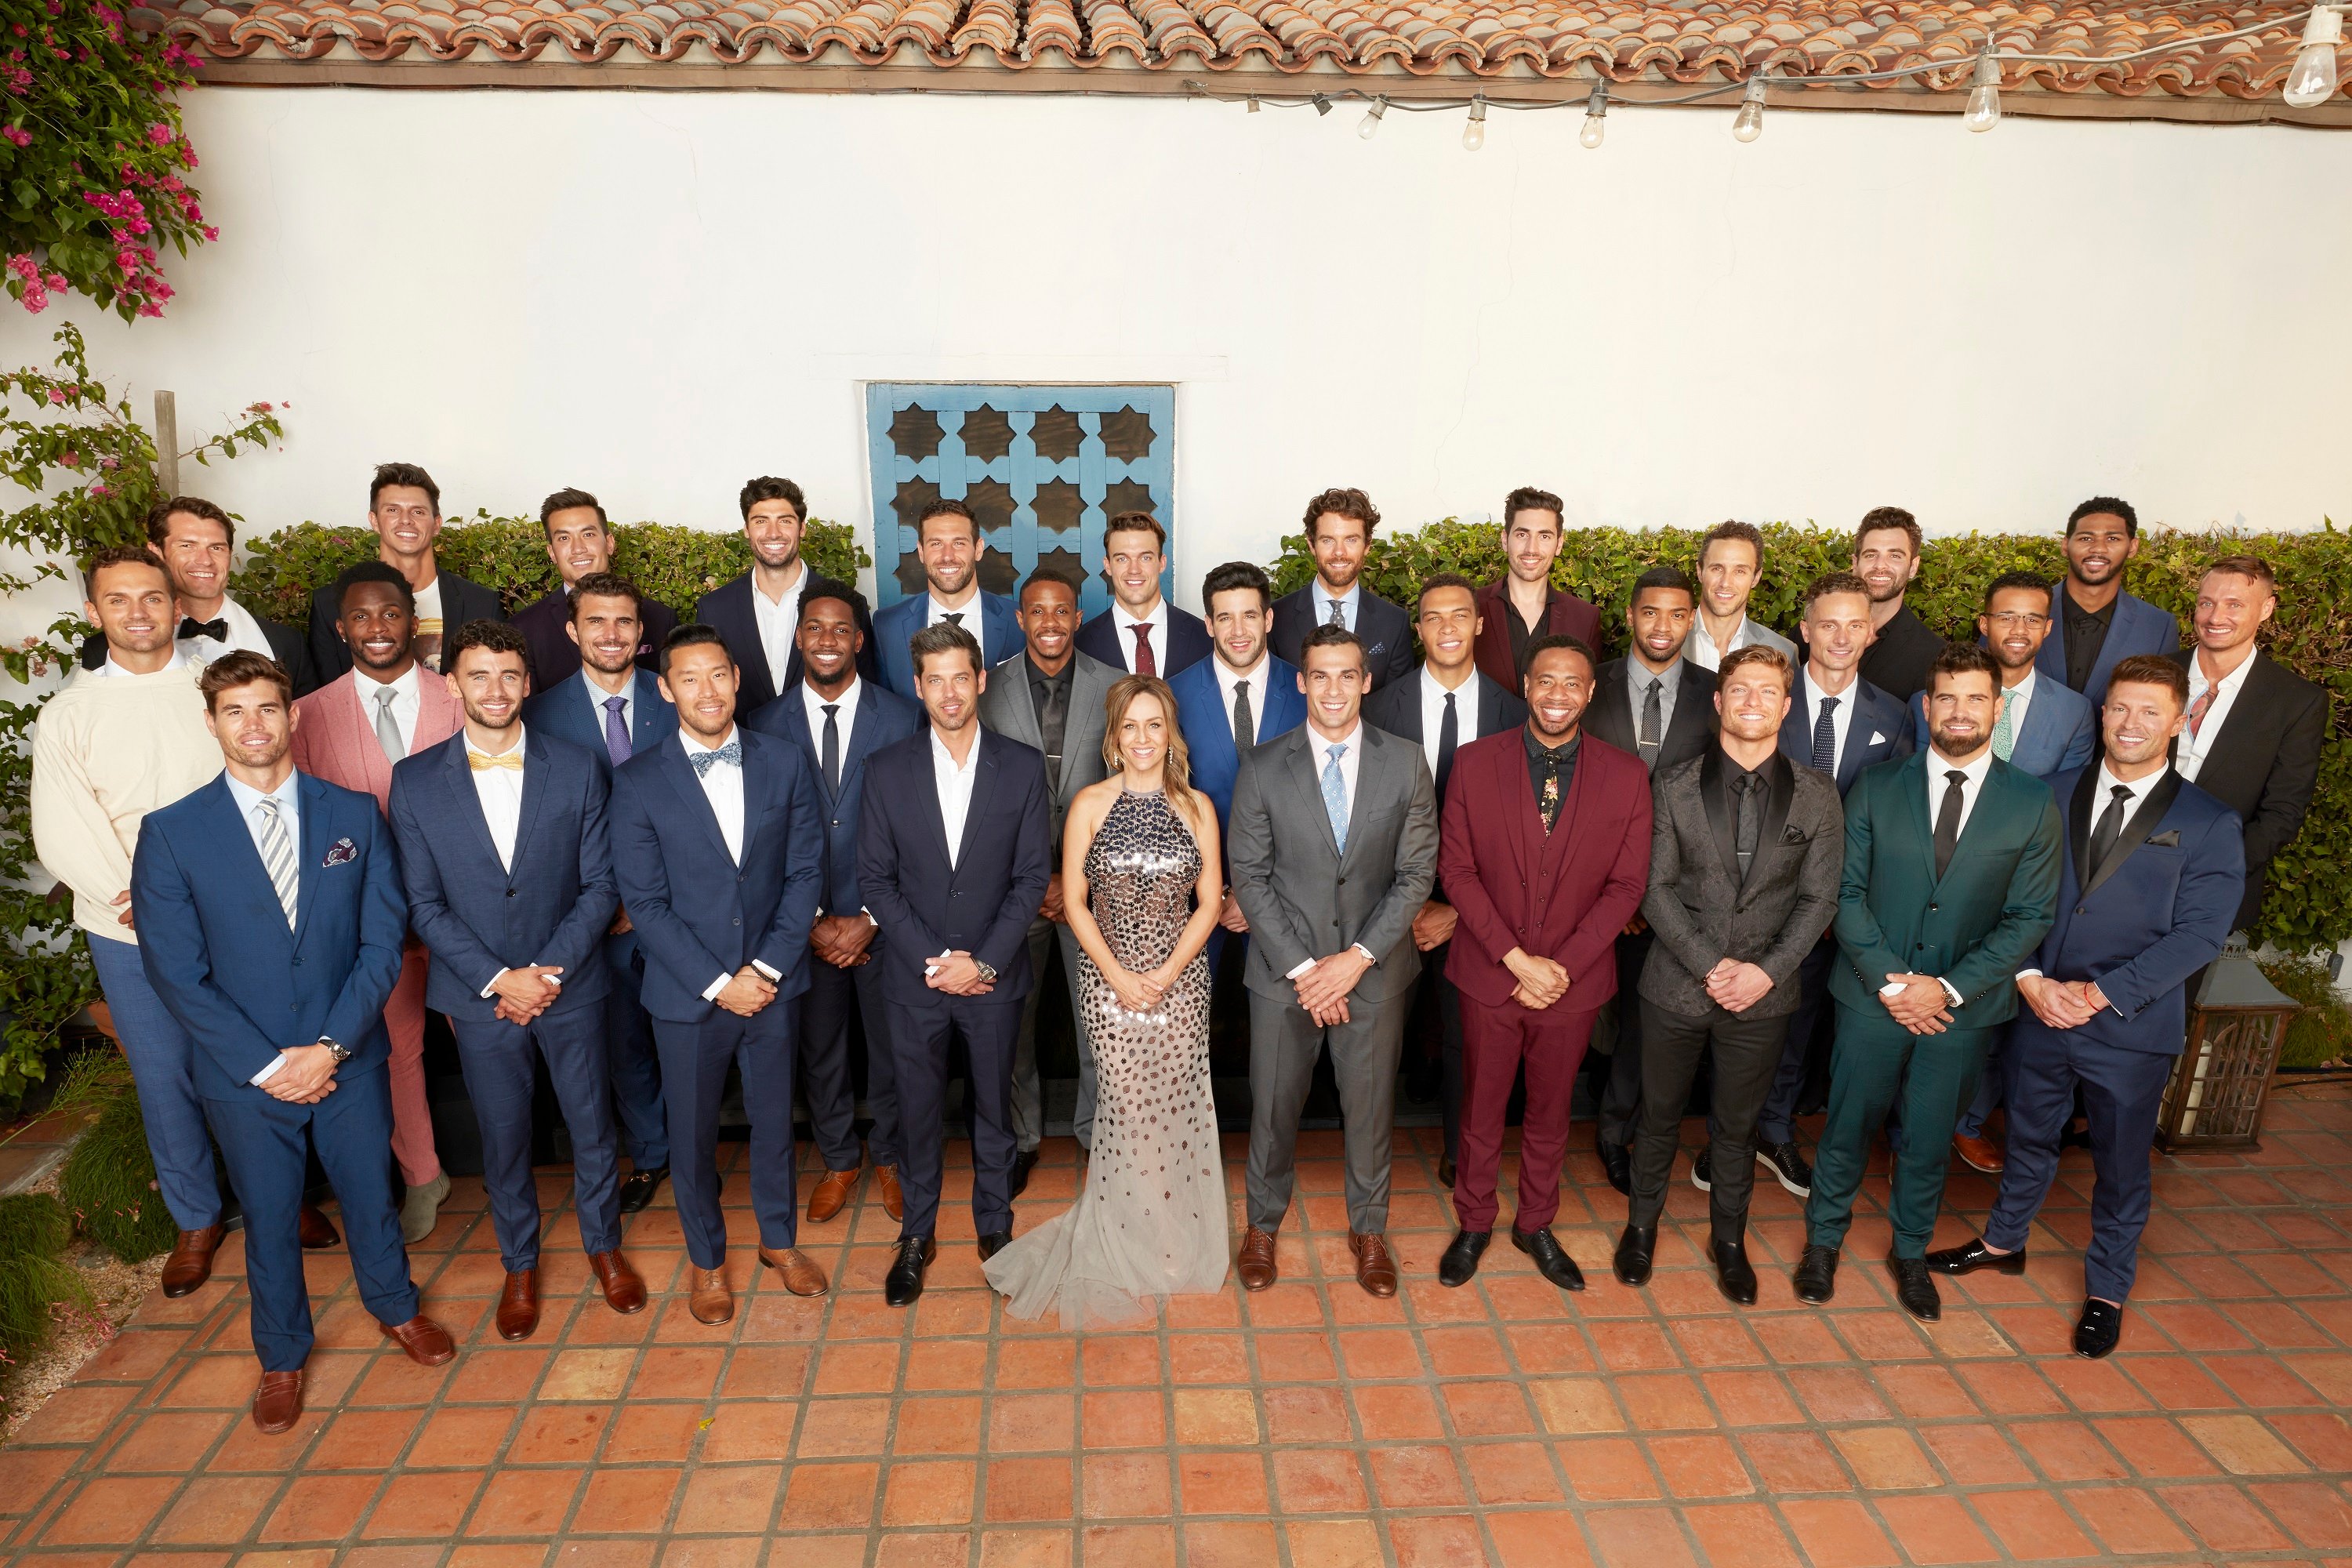 'The Bachelorette' lead Clare Crawley with her cast of men